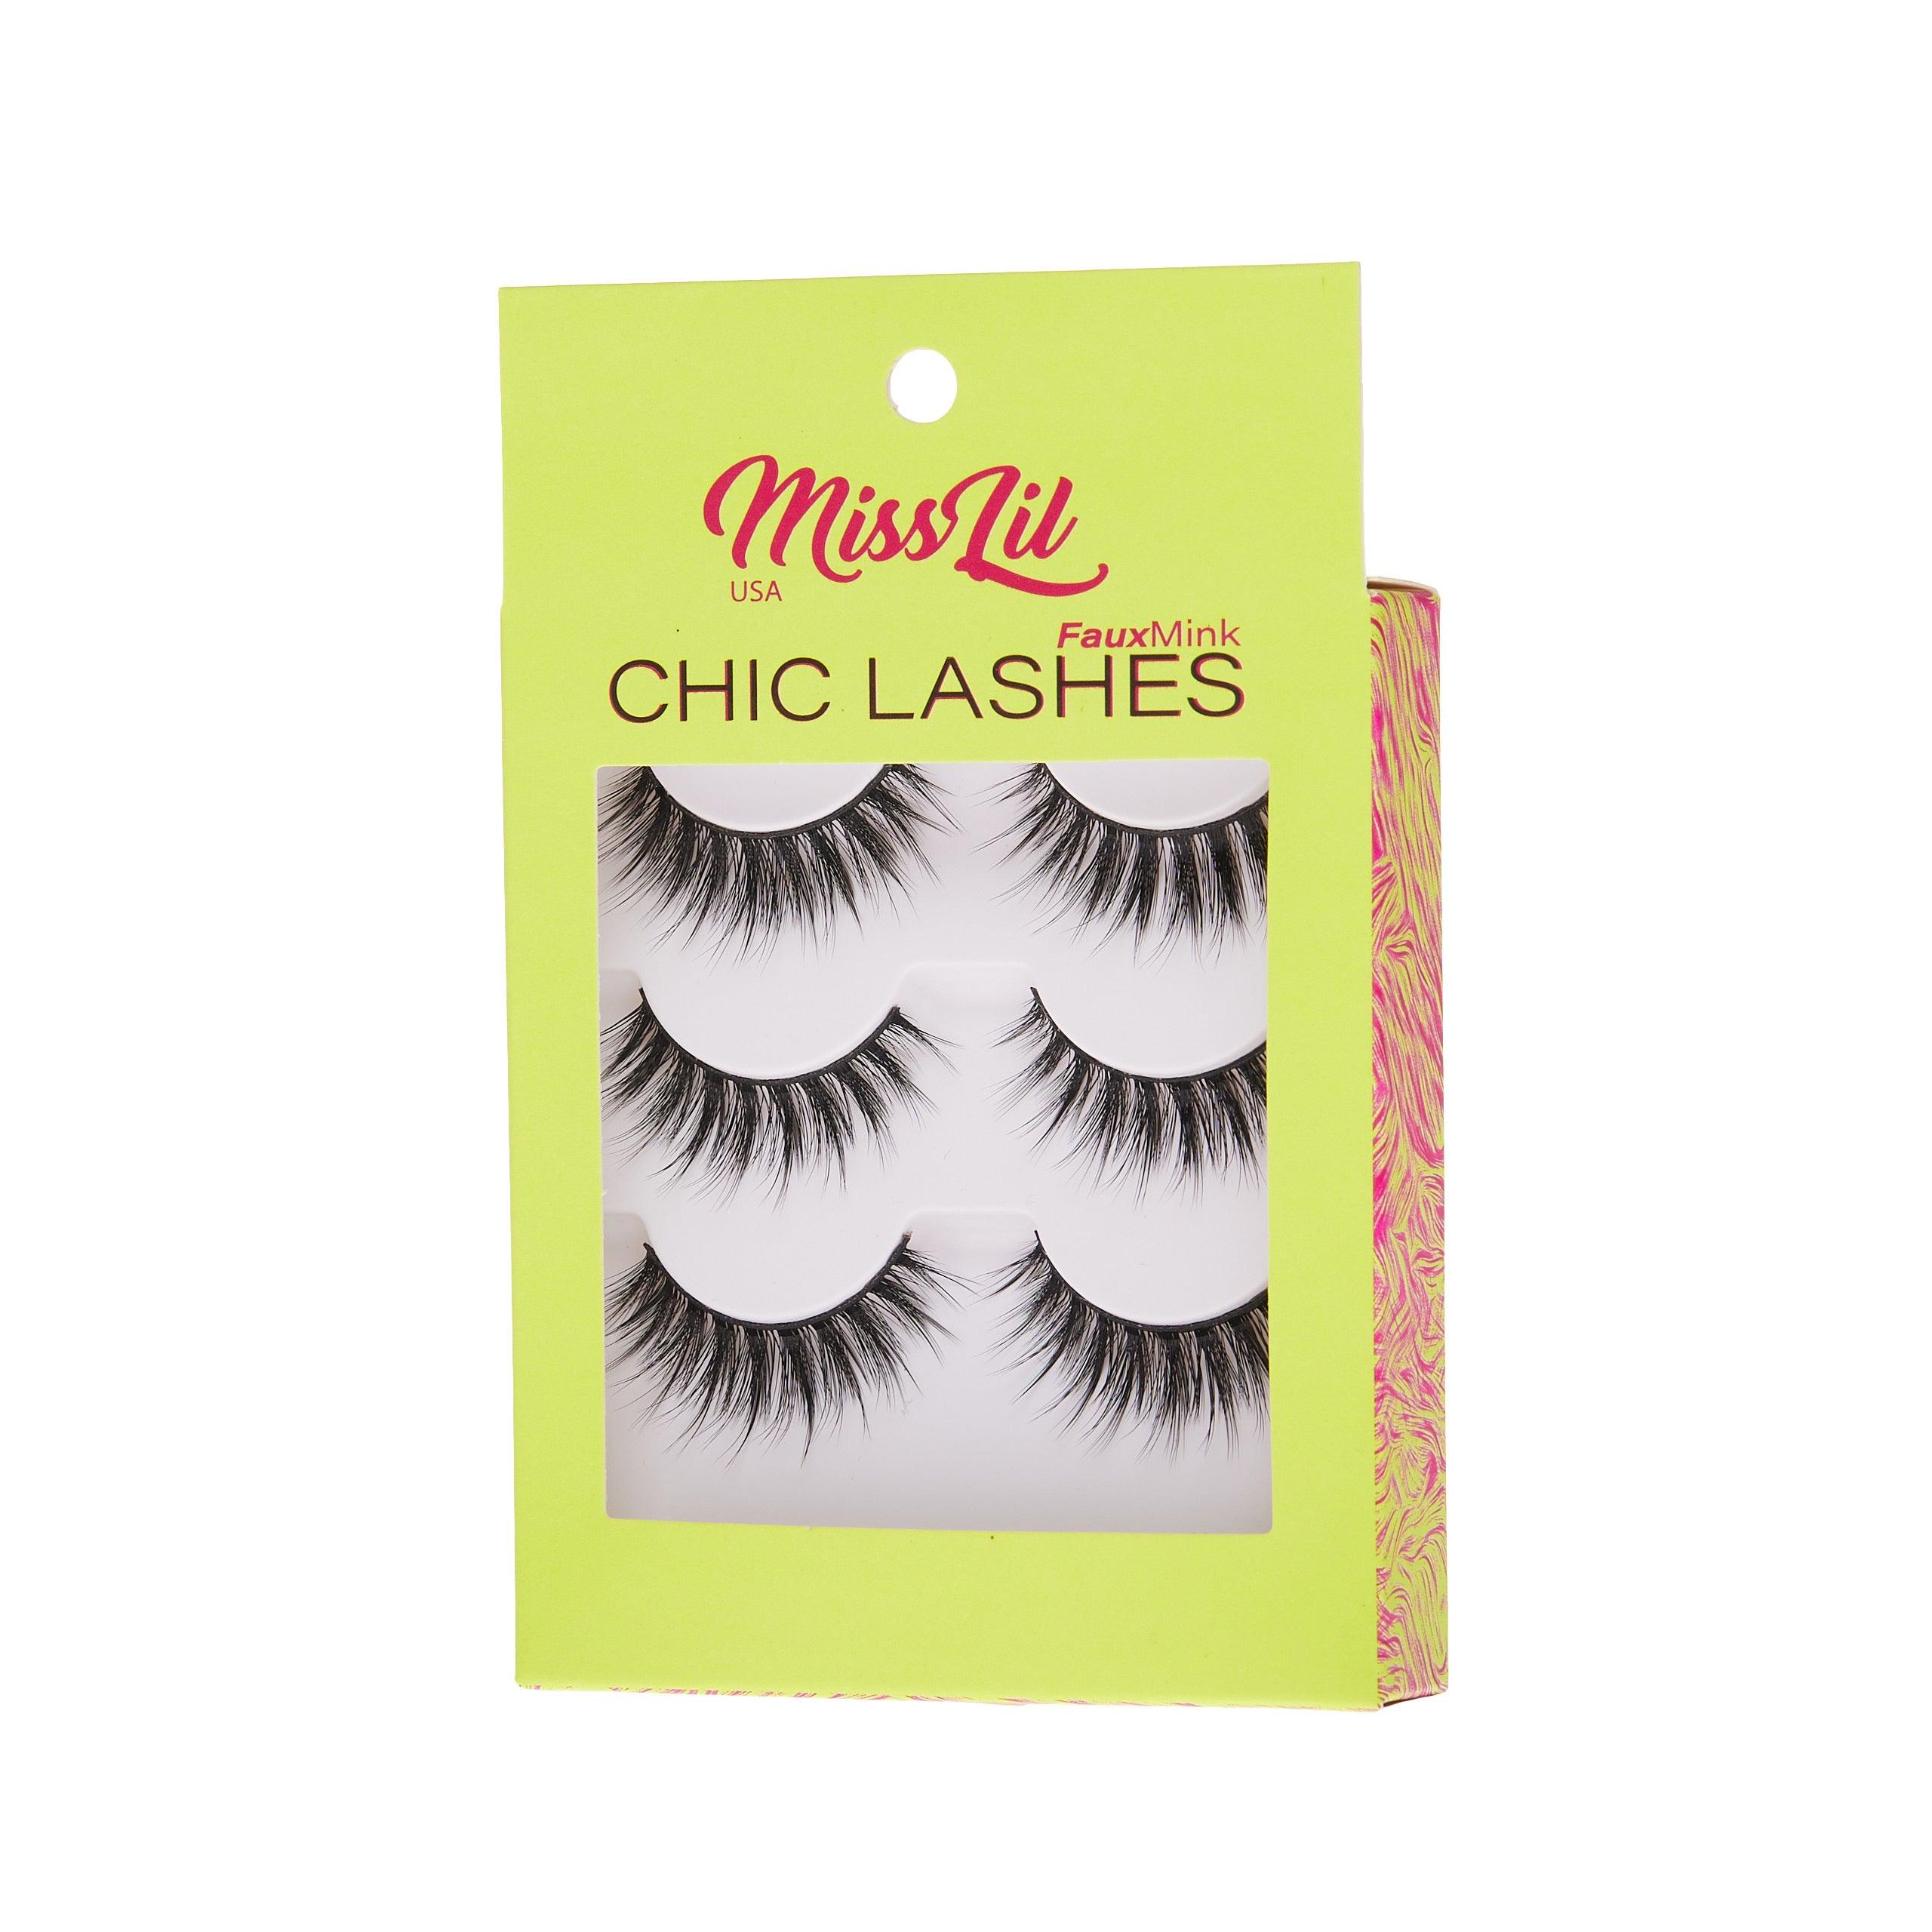 3-Pair Faux Mink Eyelashes - Chic Lashes Collection #6 - Pack of 3 - Miss Lil USA